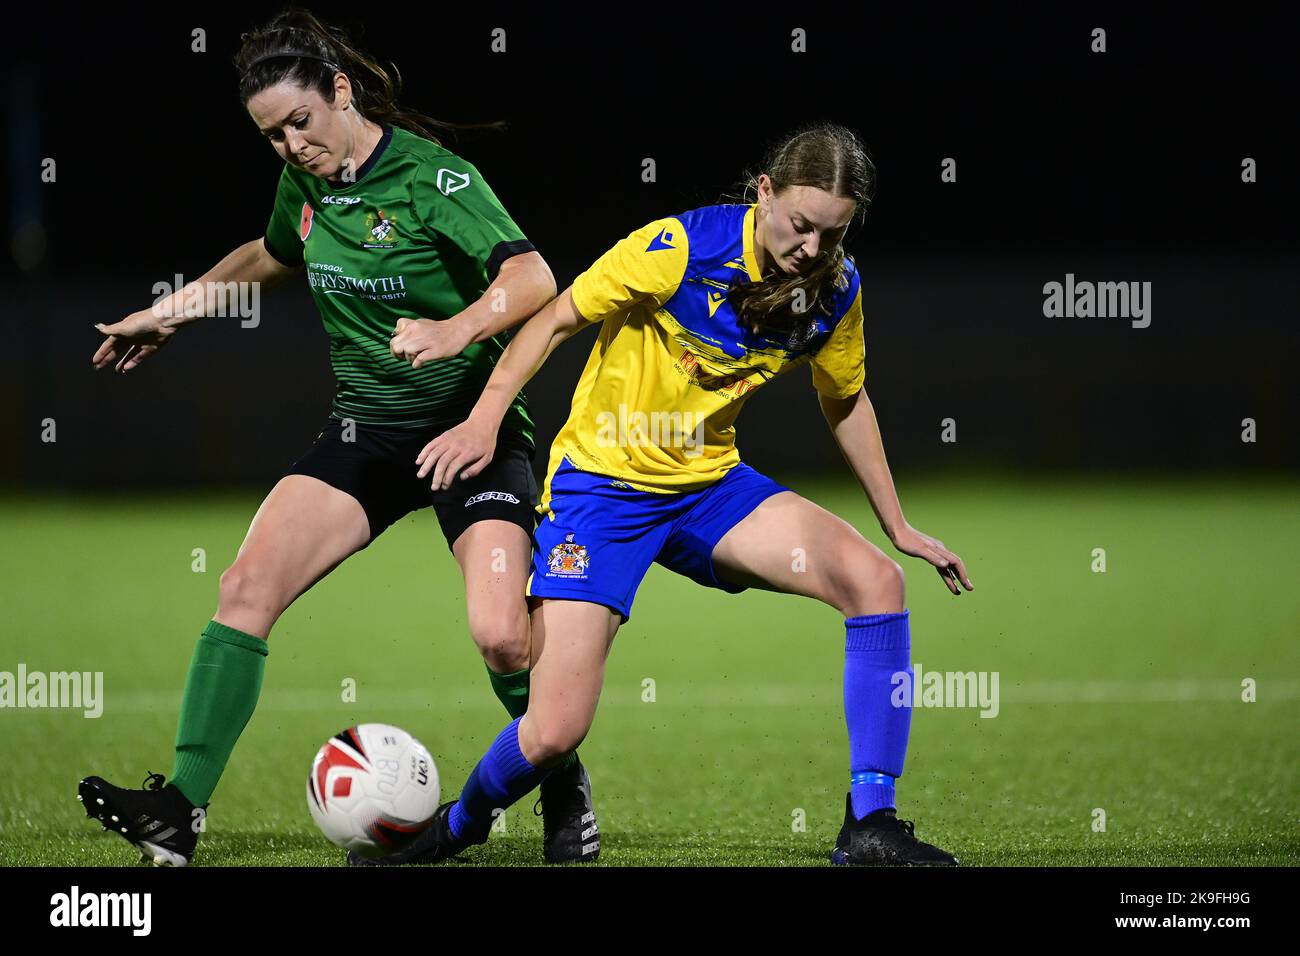 Barry, Wales. 27th Oct, 2022. Elaine Gwilt of Aberystwyth Town FC vies for possession with Taite Trivett of Barry Town Utd Women  - Mandatory by-line: Ashley Crowden  - 27/10/2022 - FOOTBALL - Jenner Park Stadium - Barry, Wales - Barry Town United Women vs Aberystwyth Town Women’s FC - Genero Adran Premier Phase 1 22/23 Credit: Ashley Crowden/Alamy Live News Stock Photo